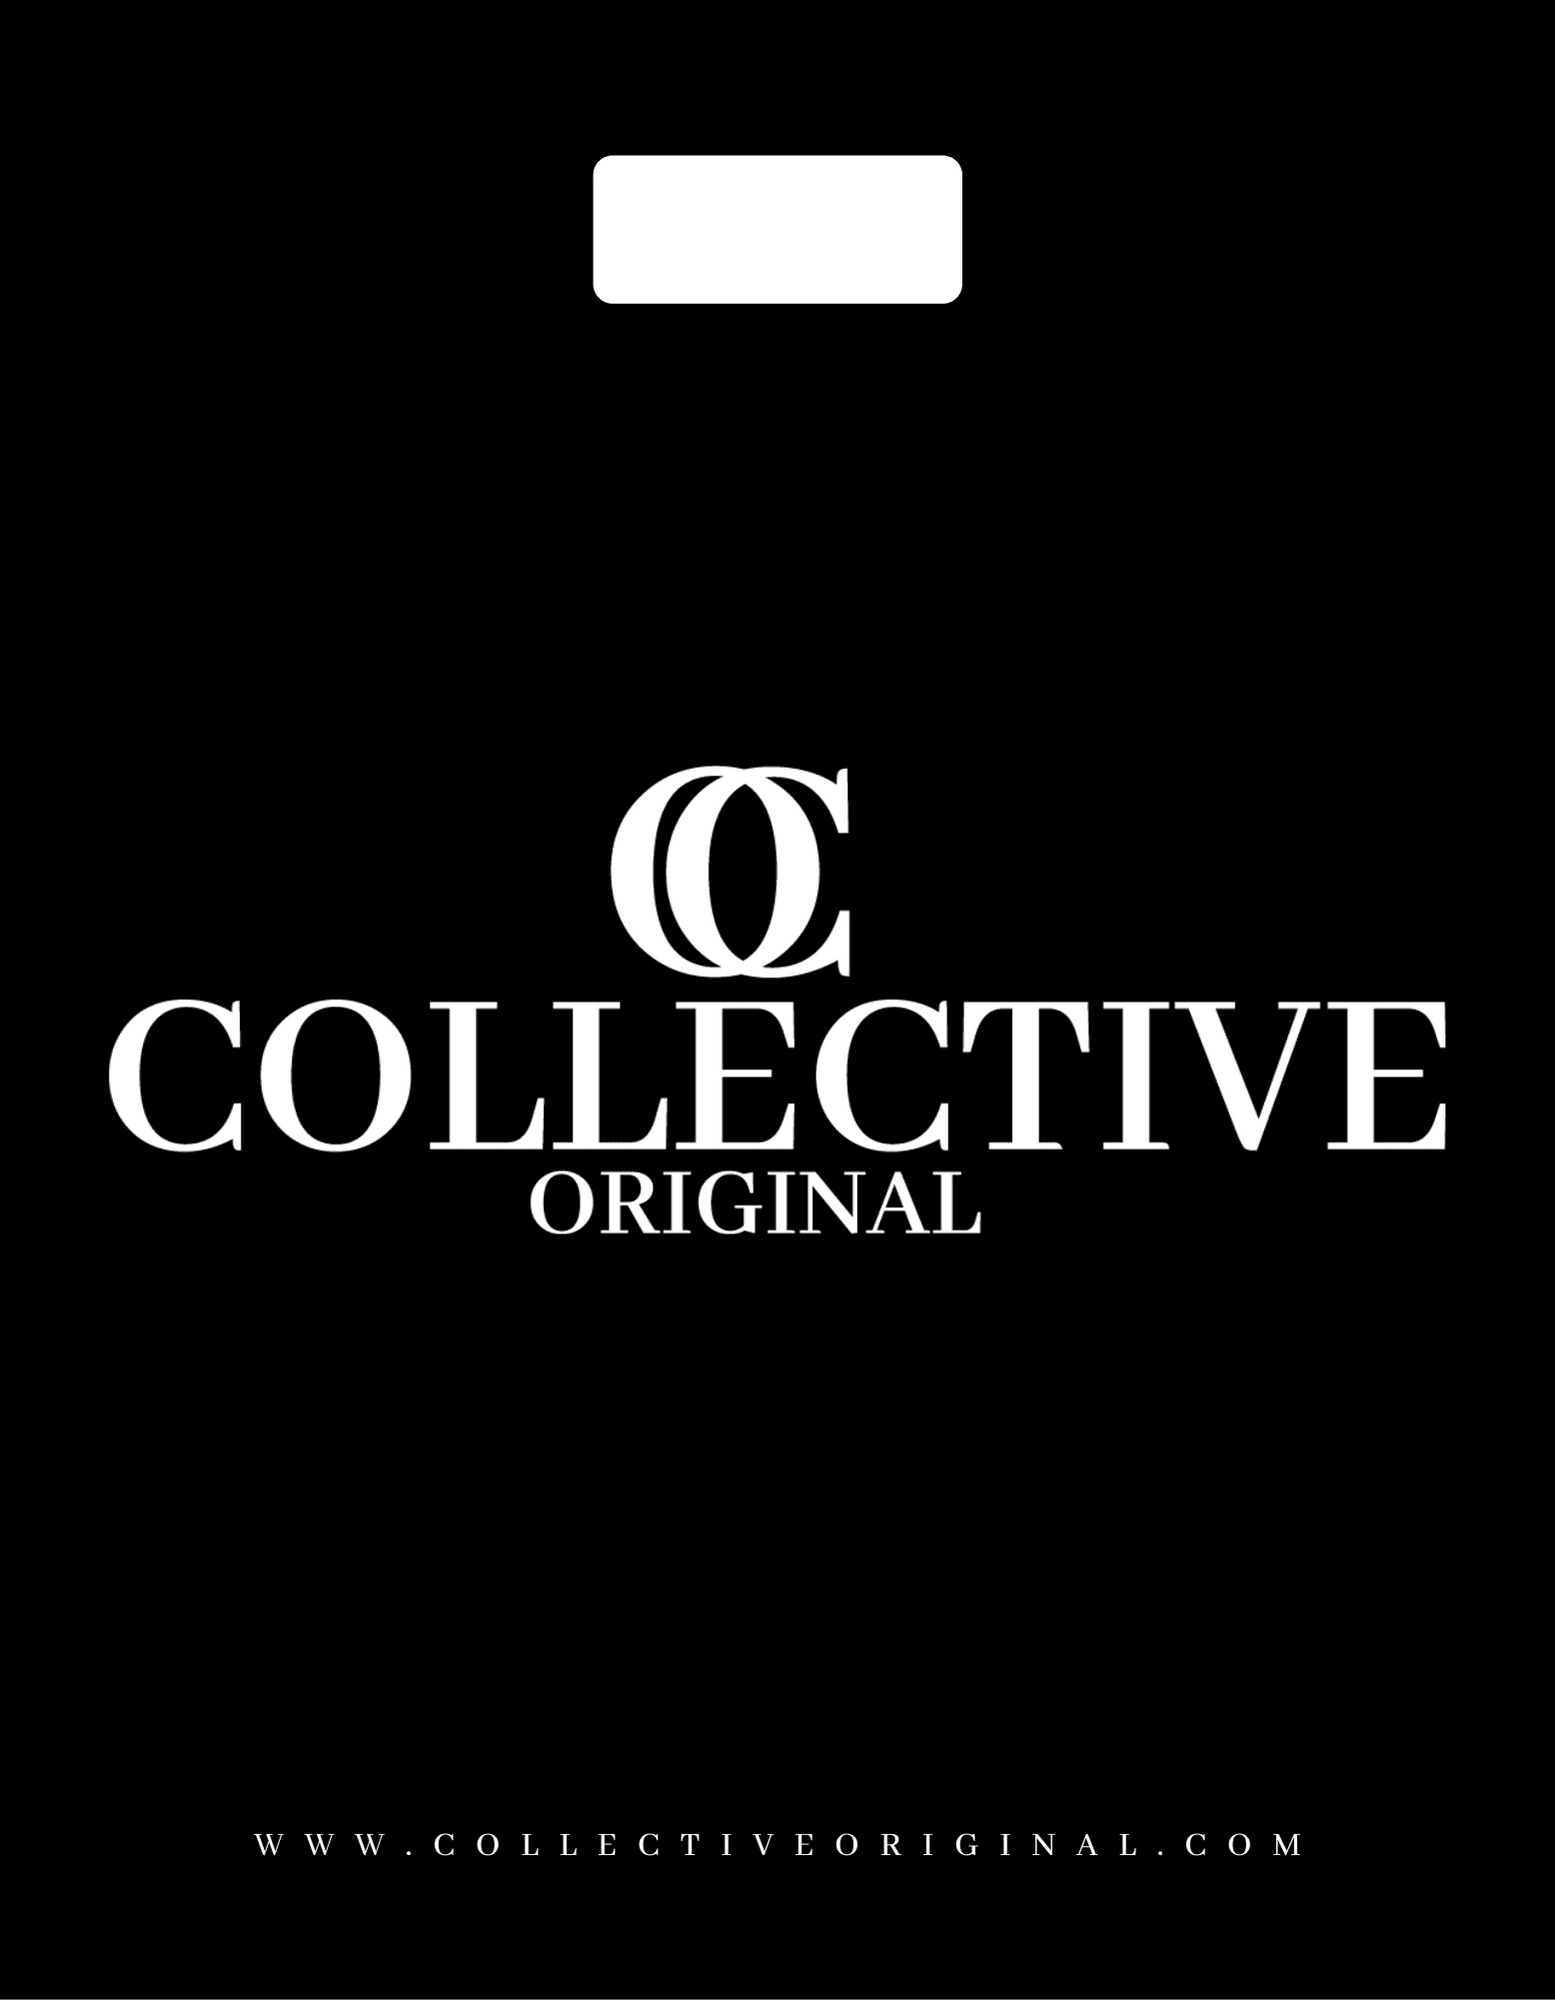 Collective's First Expo